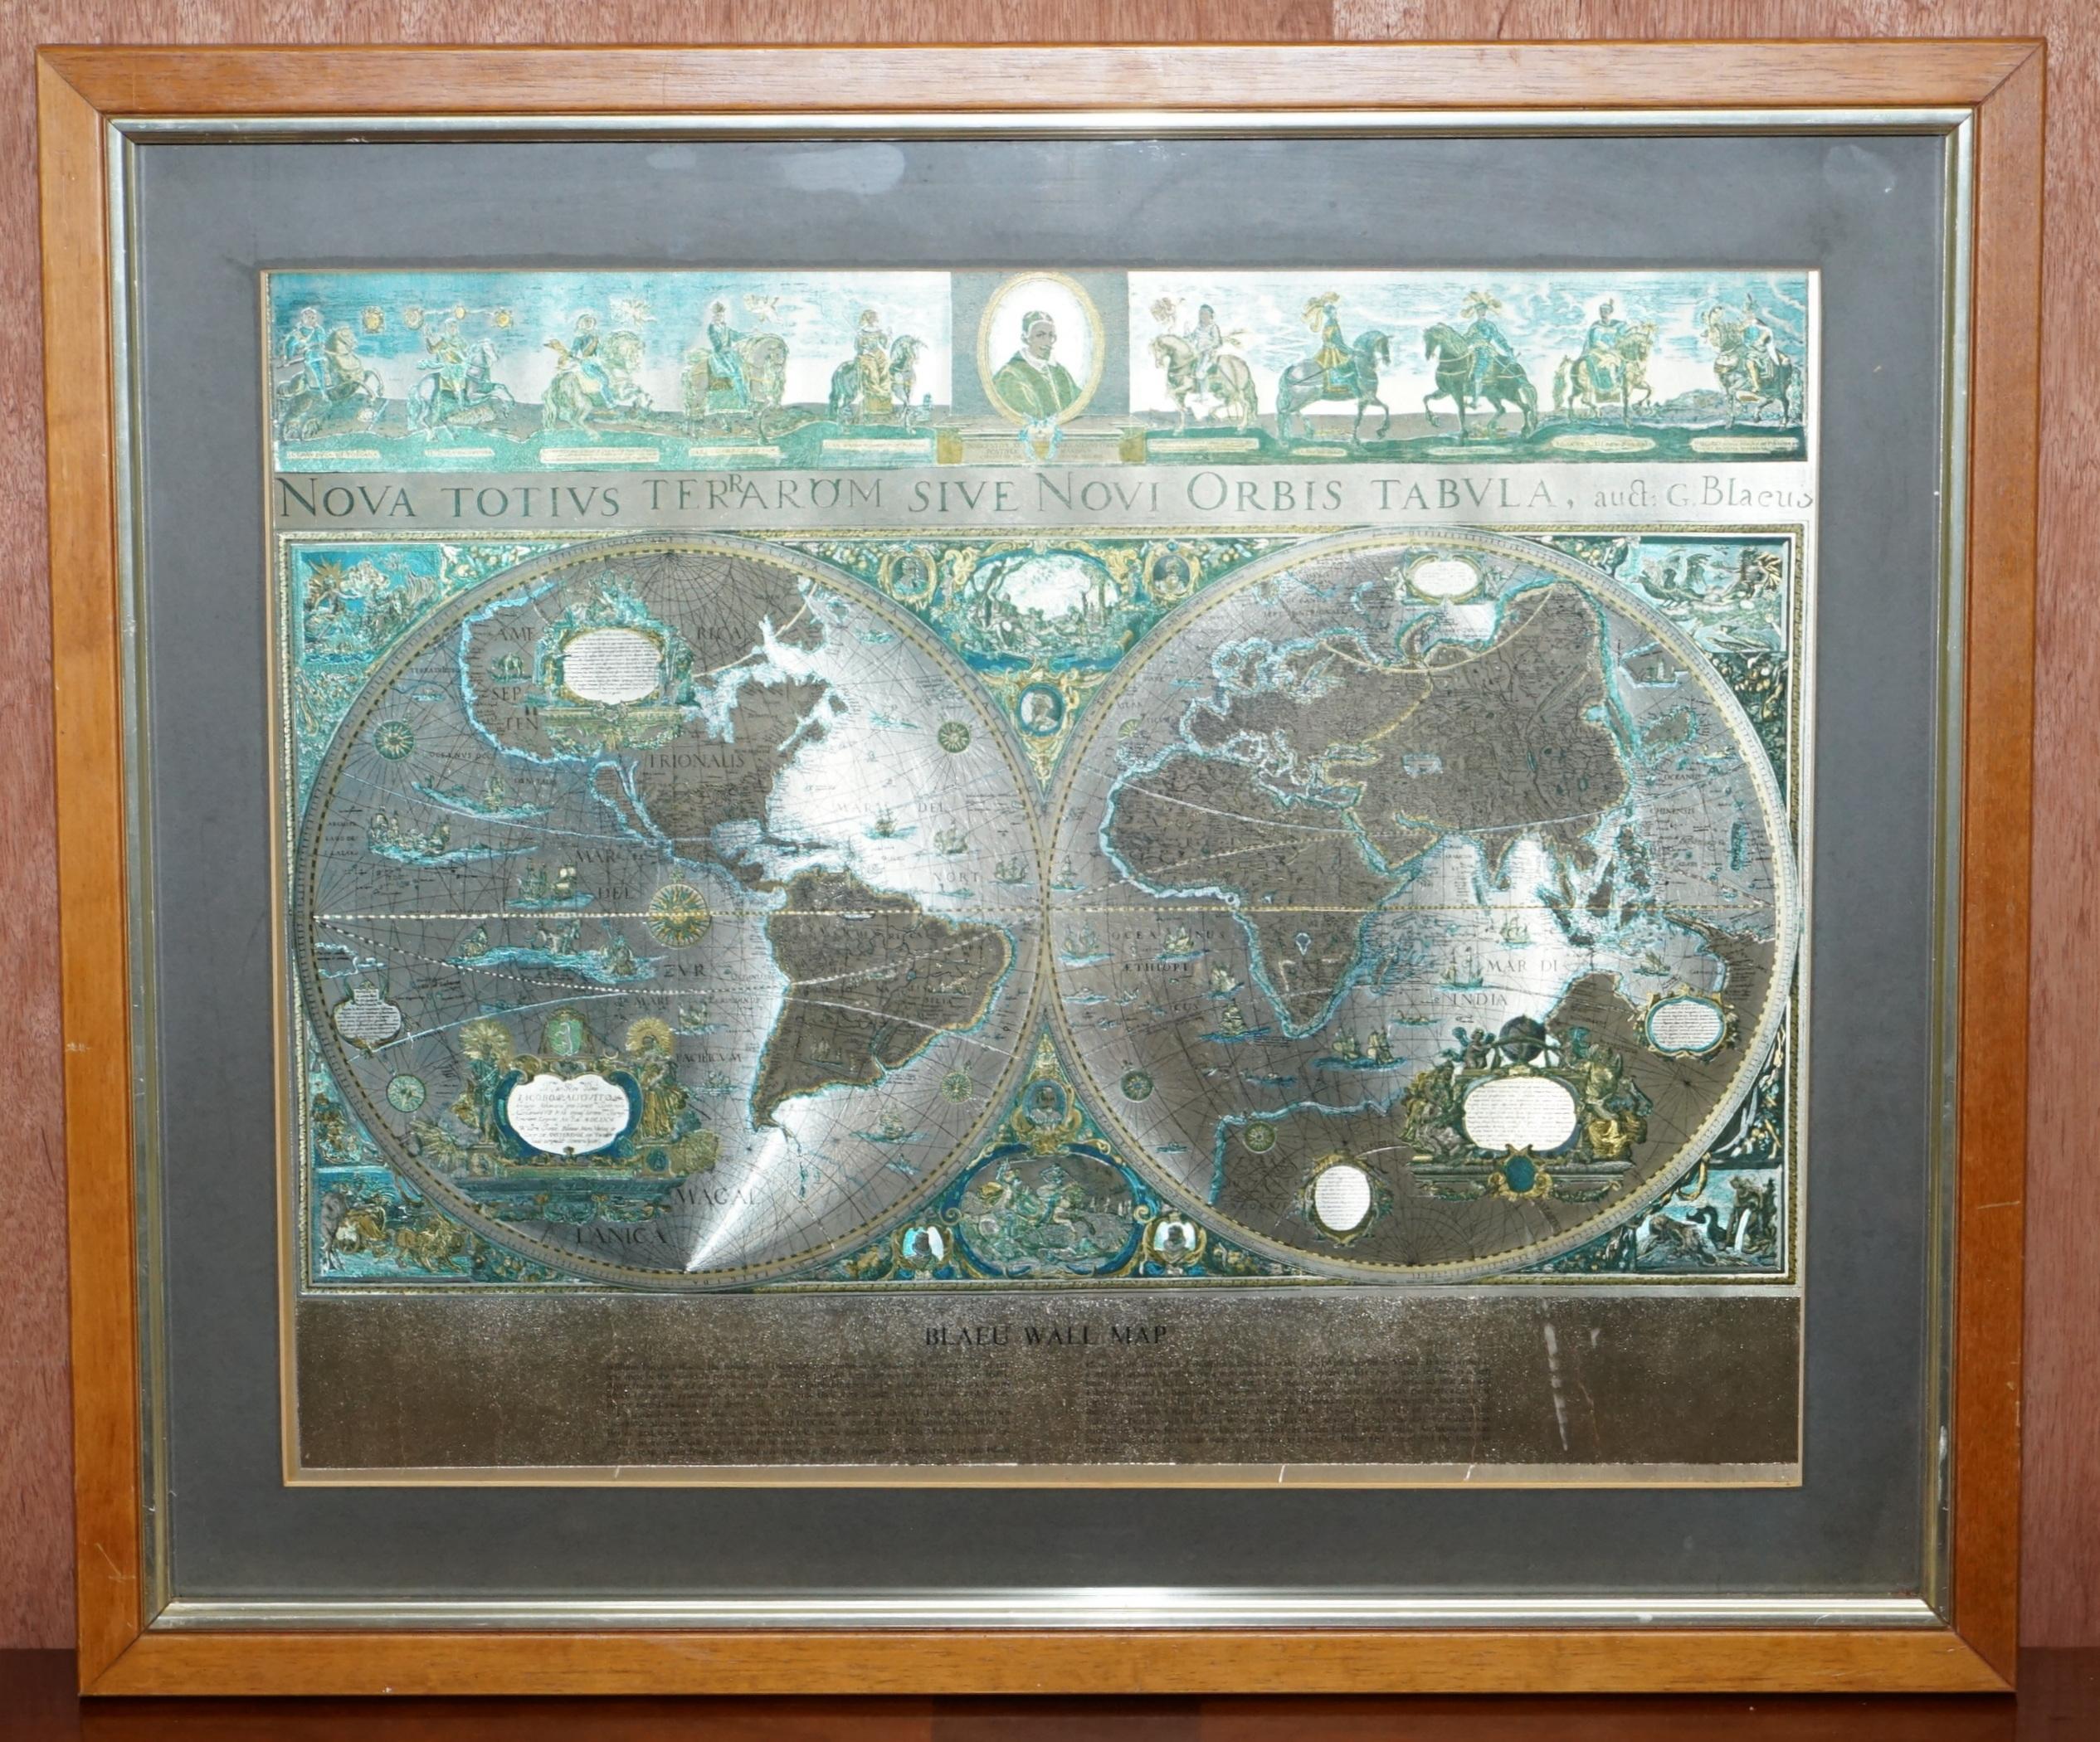 We are delighted to offer for sale this lovely Antique style pictorial plan map of the globe based on the original Willem Blaeu 1571-1638 engraved in silver leaf foil 

This is a very interesting and decorative piece, it looks good in any setting.